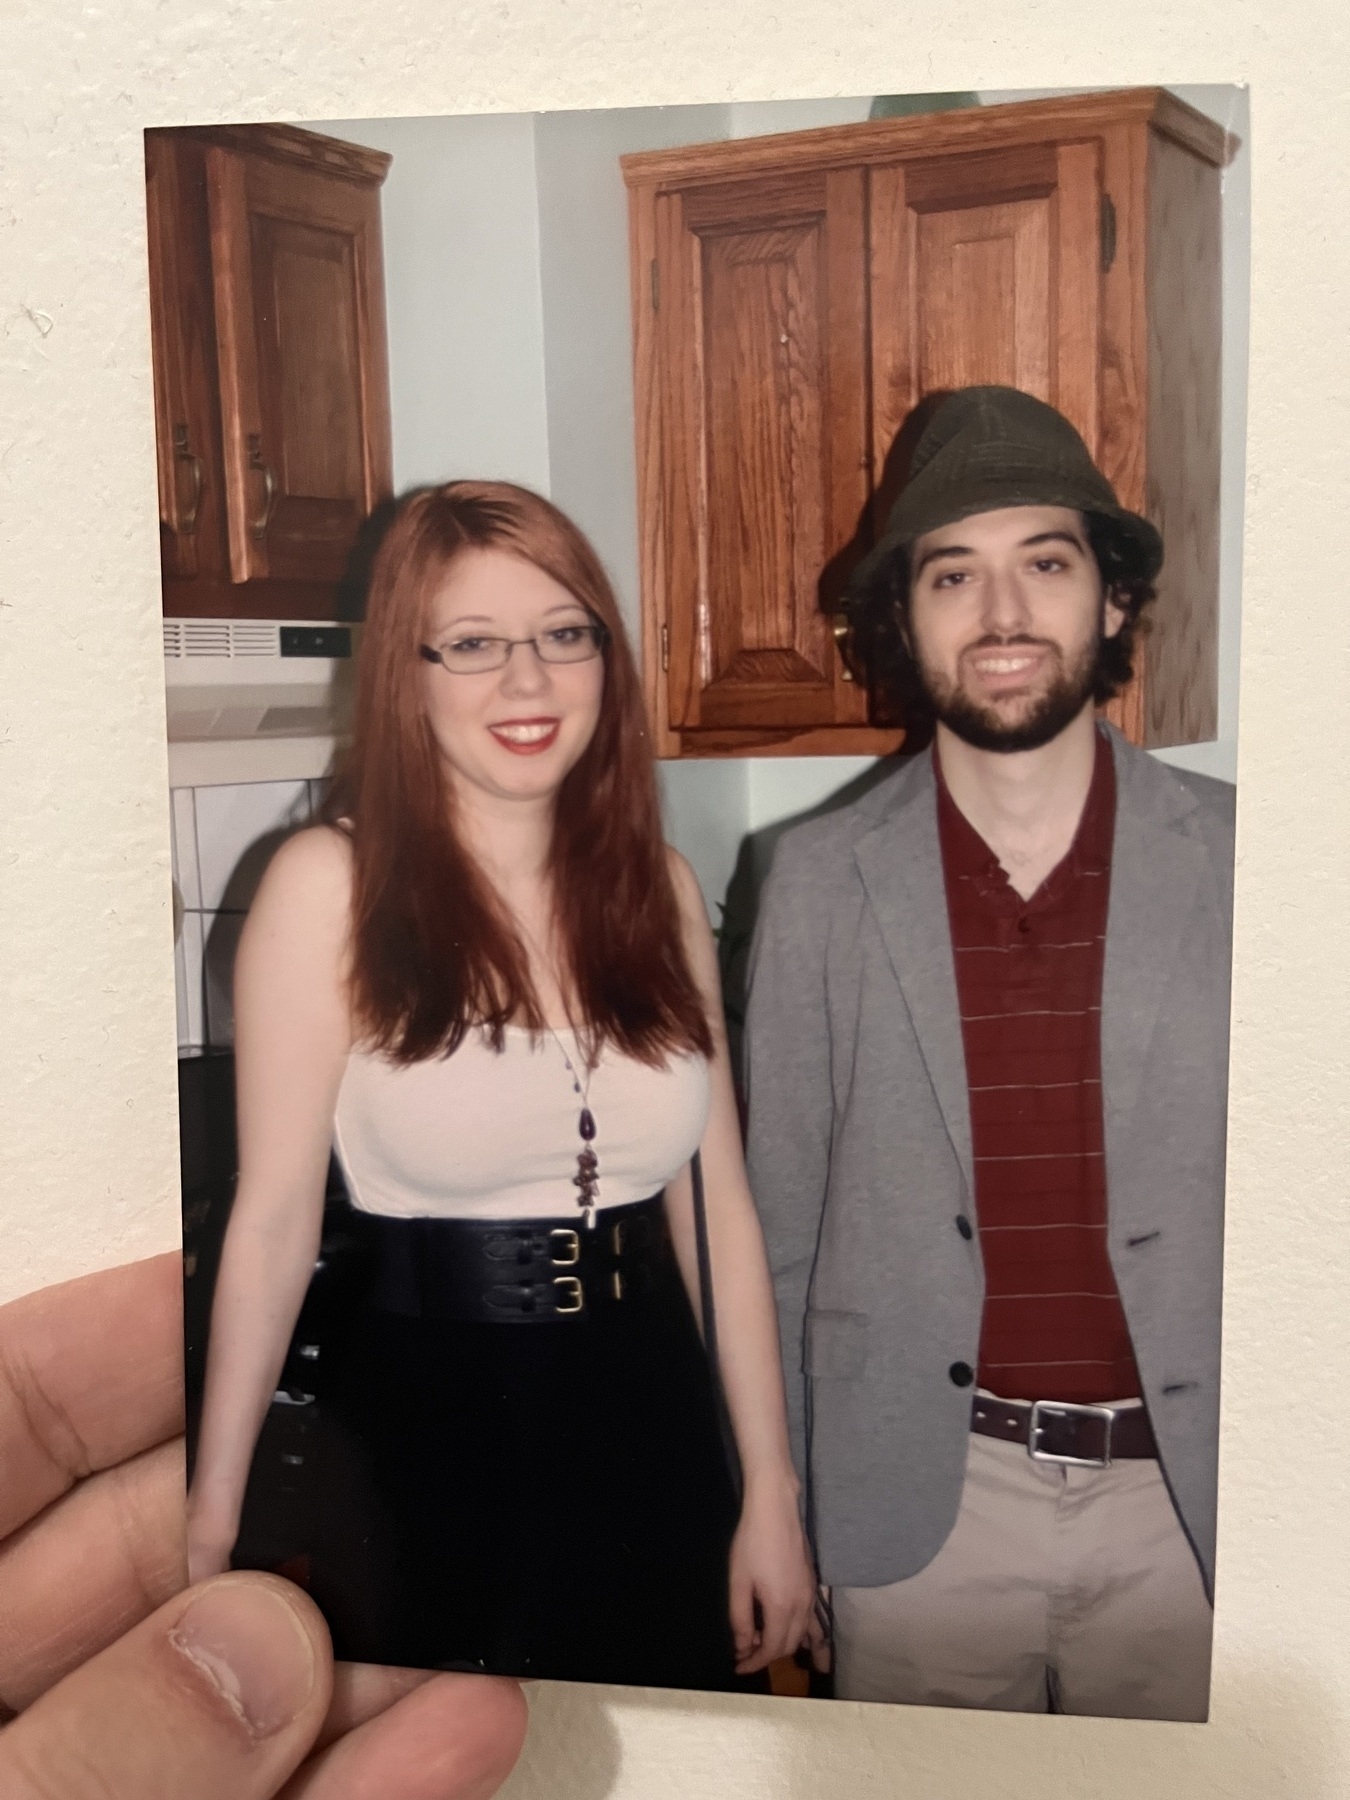 Two young white peope standing awkwardly next to each other. The woman on the left, my sister, has long red hair and smiles somewhat uneasily. In the right, is me. I have a red shirt that doesn’t quite fit, khaki pants, a grey blazer, and on my head is a floppy, misshapen dark green fedora. I have a thin, untrustworthy beard. Unkept curls sprout from under the hat. My expression is haunted. We are in a kitchen.